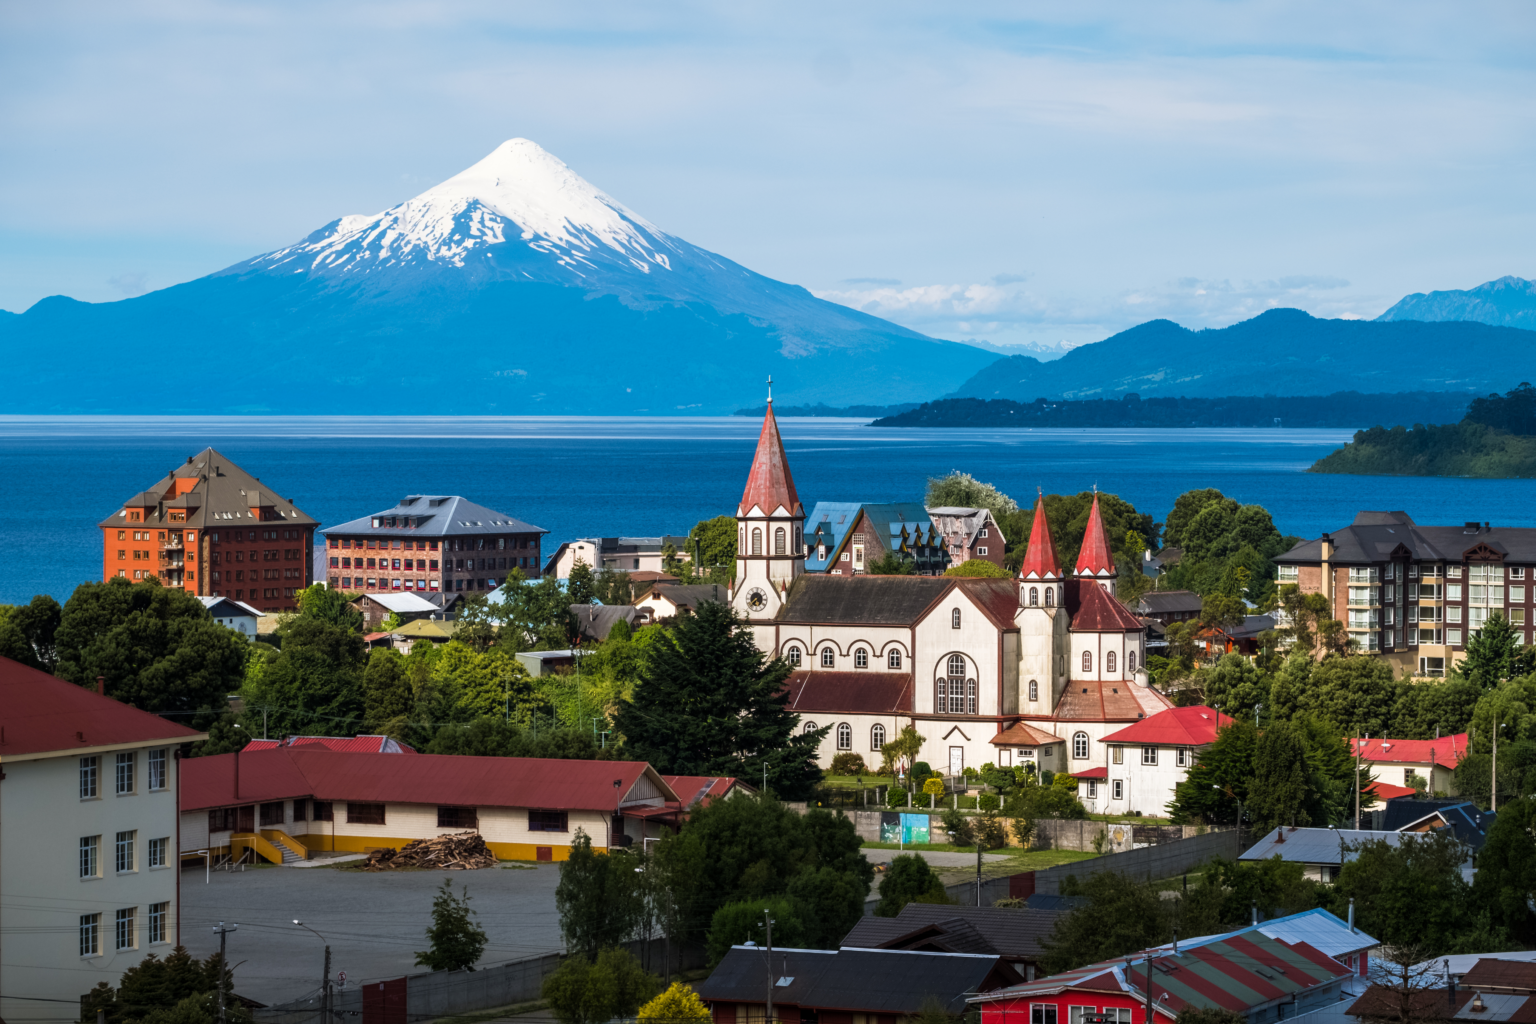 Town of Puerto Varas in front of the Llanquihue Lake and the snow-capped Osorno volcano